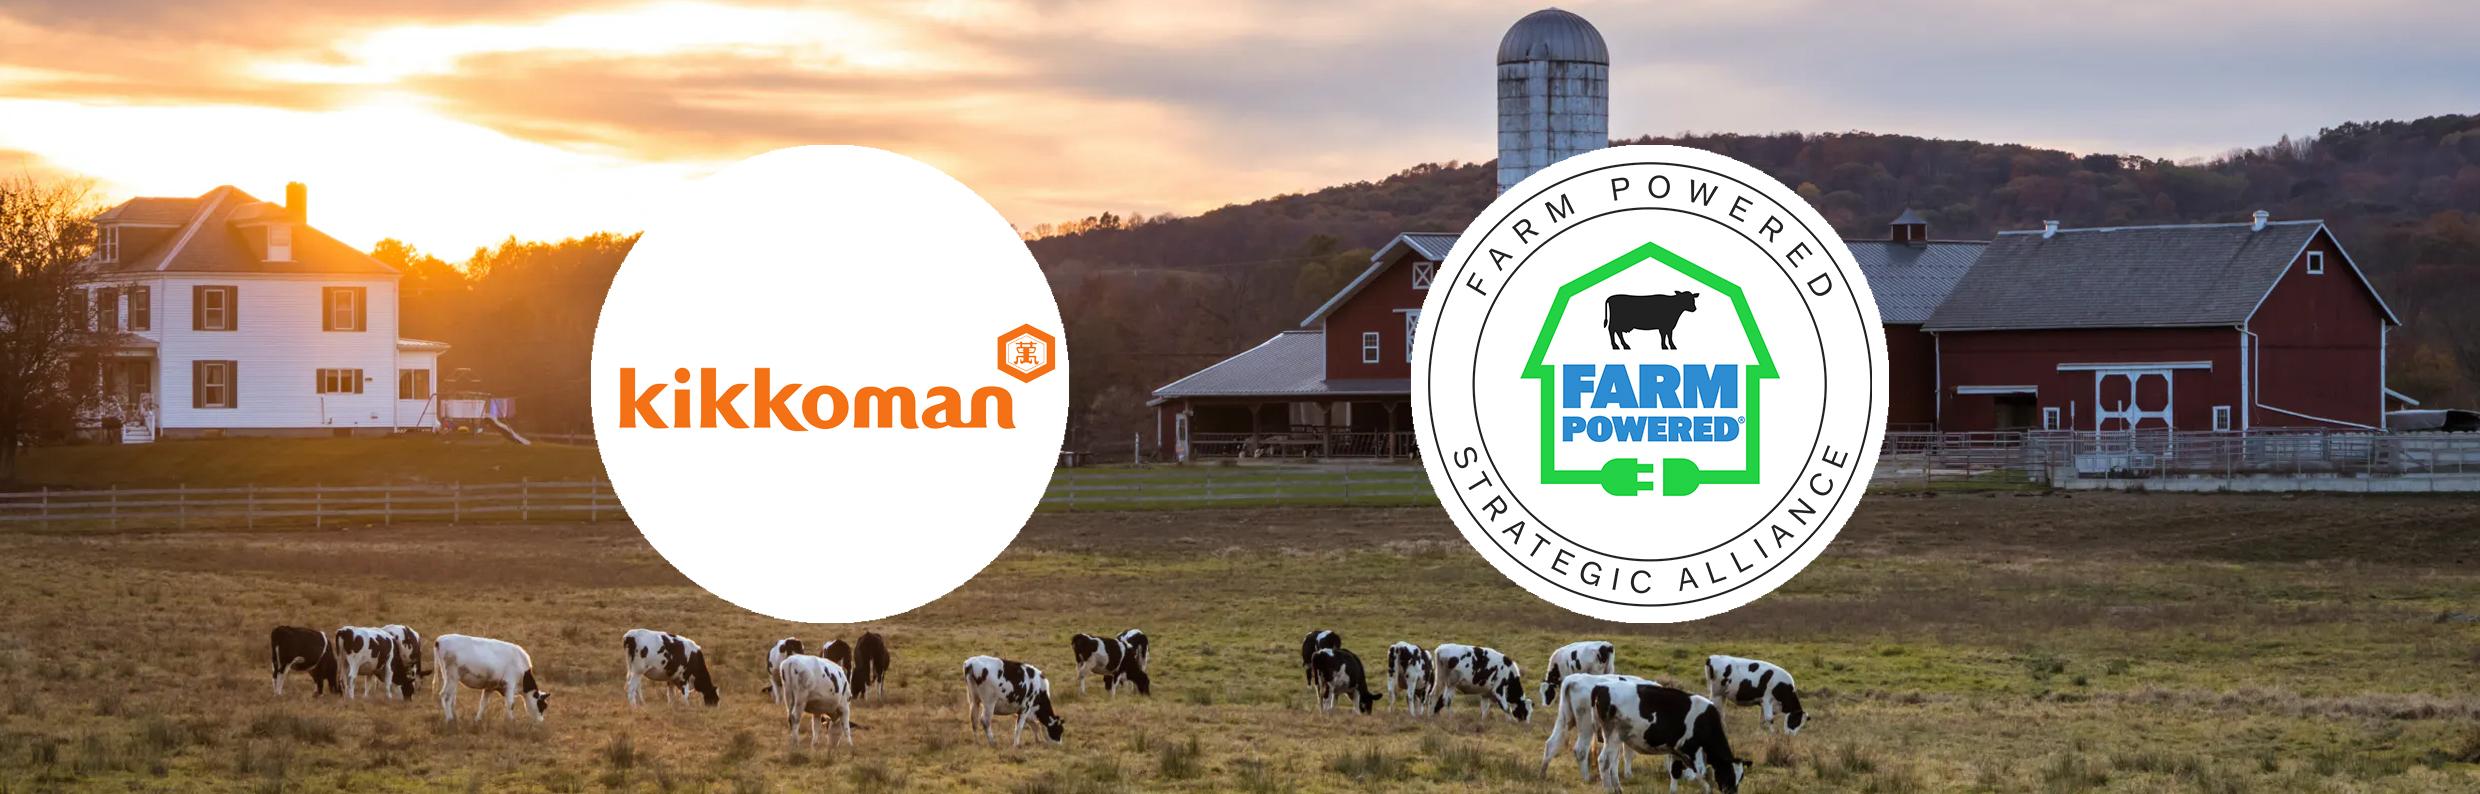 Logos of kikkoman and Farm Powered Strategic Alliance, with a background image of a farm using anaerobic digestion